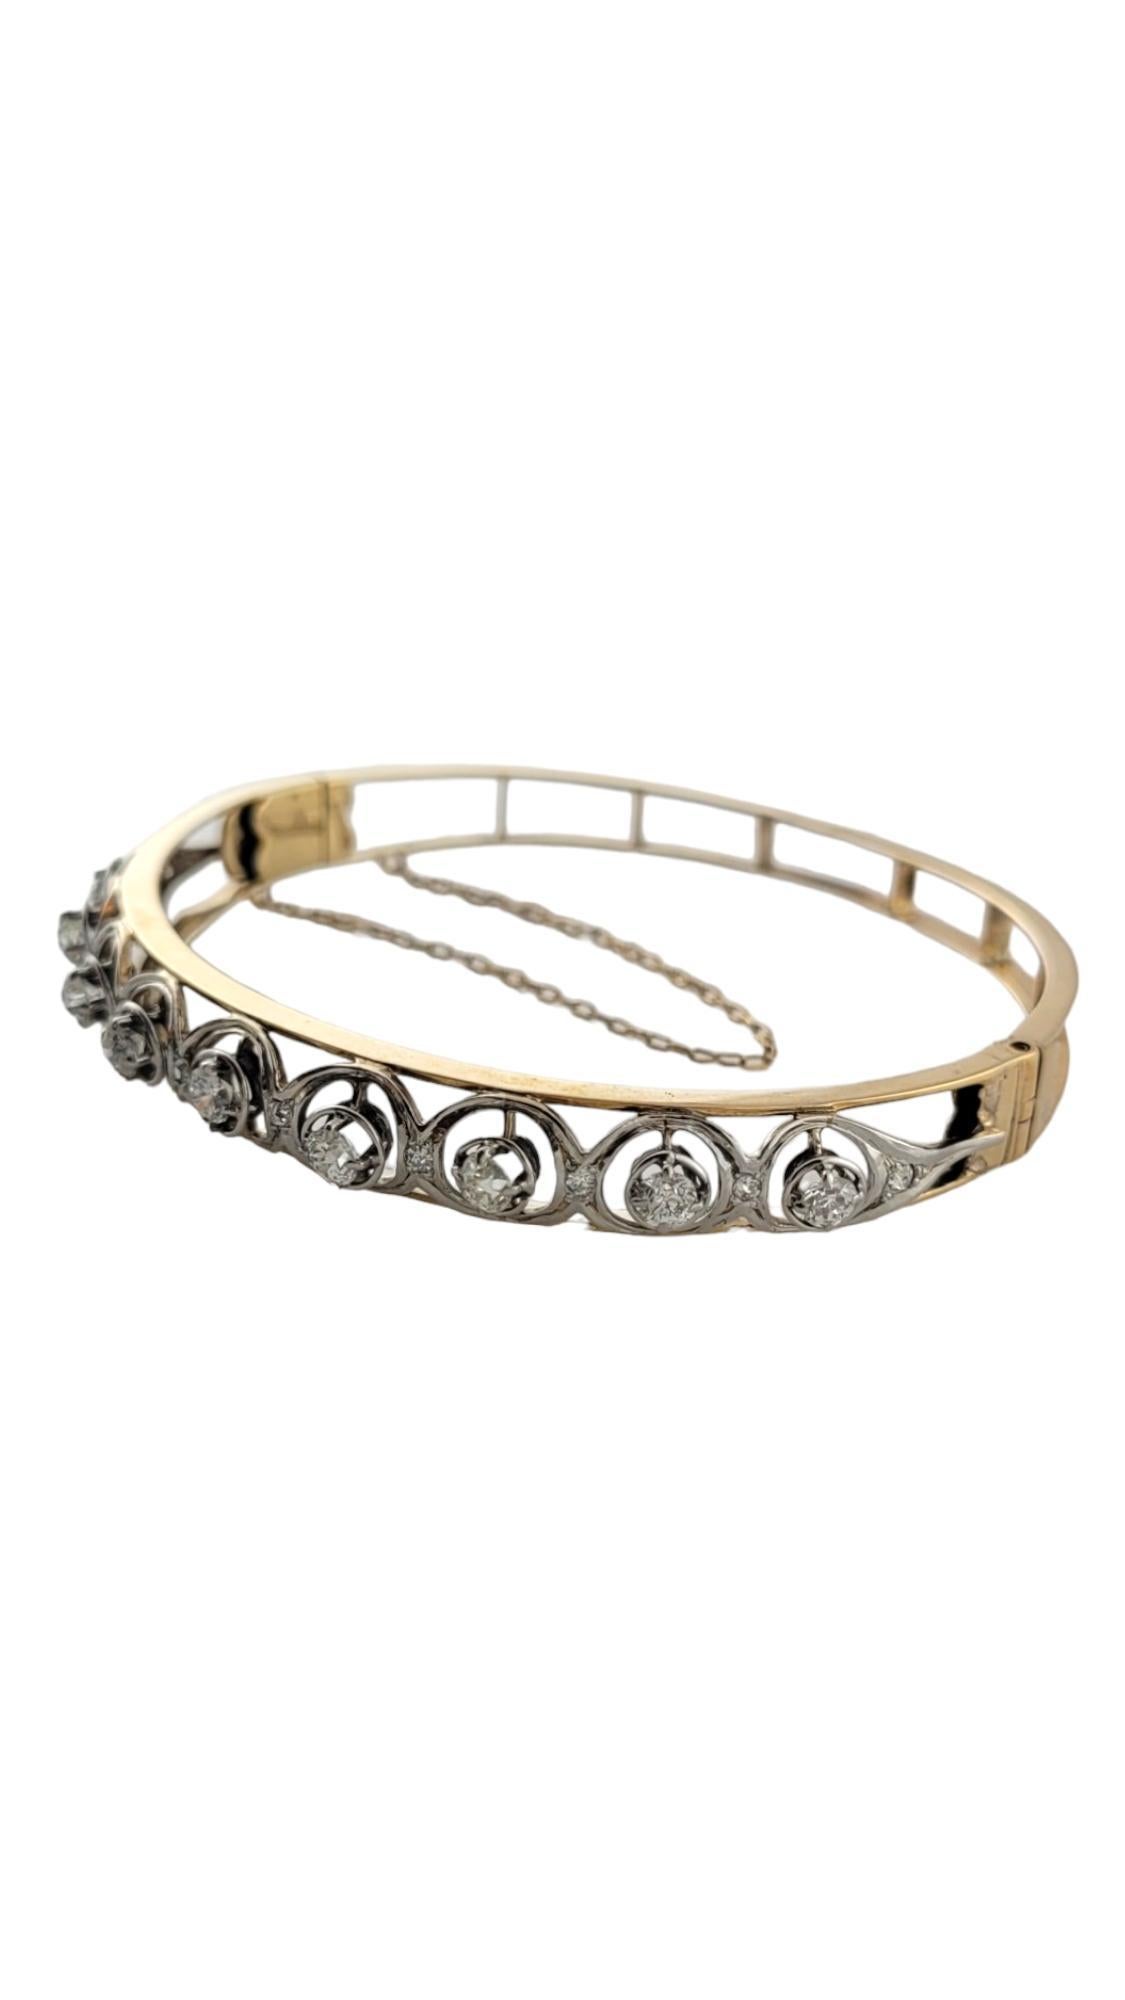 This lovely two tone hinged bangle bracelet features 19 round brilliant and round cut diamonds set in beautifully detailed 14K gold.  

Width:  8 mm.  Safety chain closures.

Approximate total diamond weight:  1.30 ct.

Diamond color:  H-K

Diamond